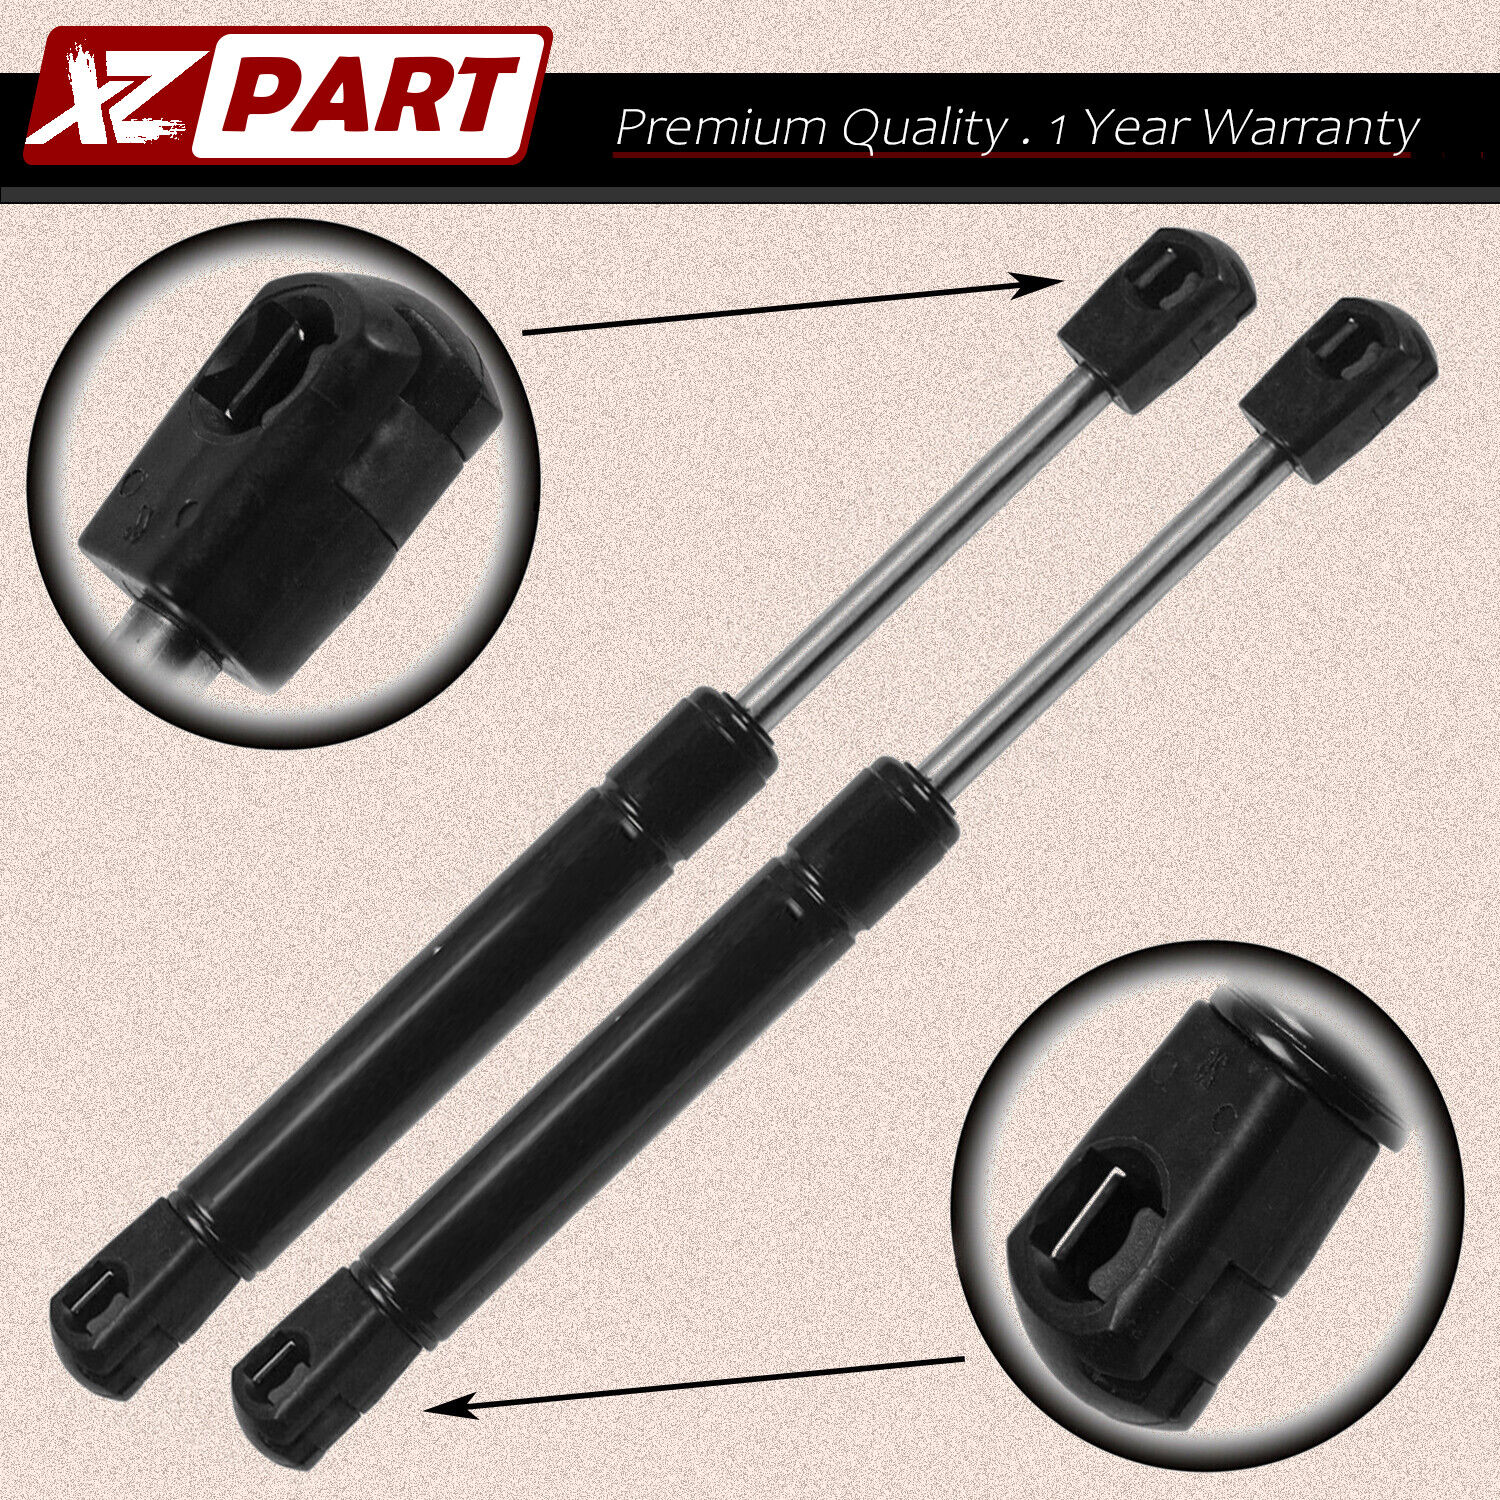 2x Springs Shocks Struts Hood Lift Supports For Ford Thunderbird Mercury Cougar